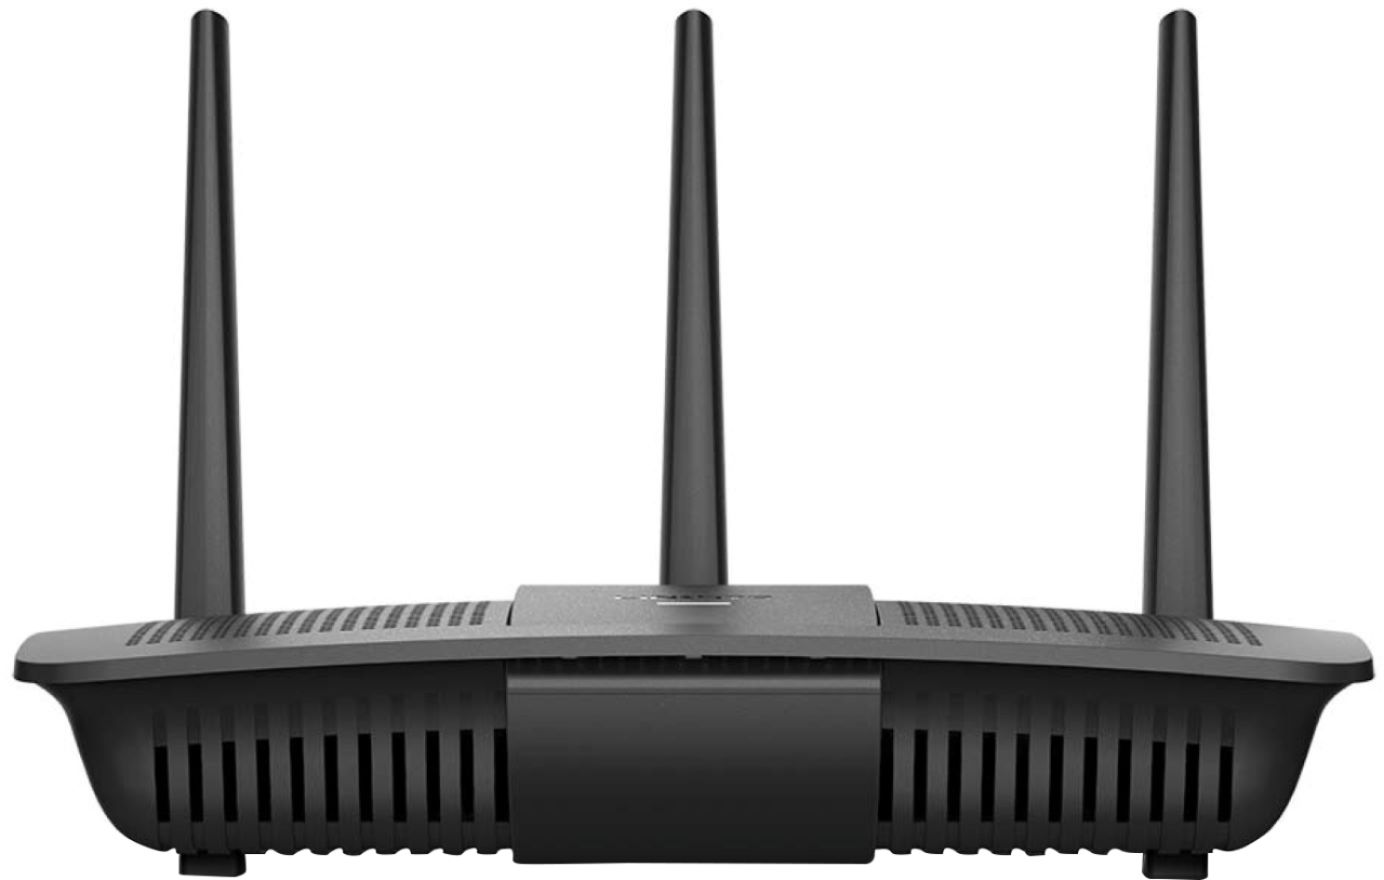 Linksys WiFi 5 Router